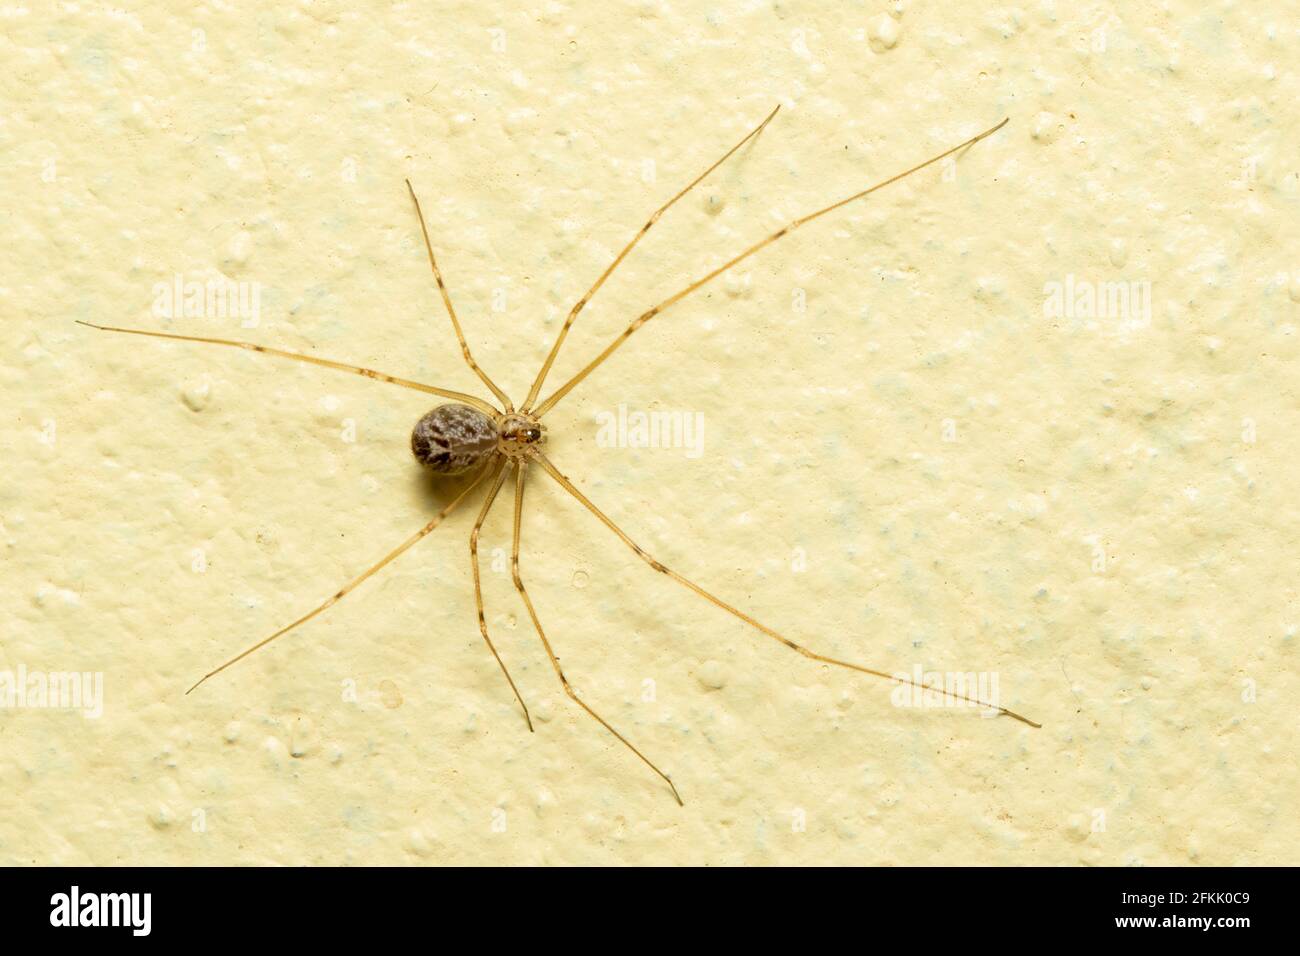 Image of daddy long legs spiders on the floor. Insect. Animal. Stock Photo